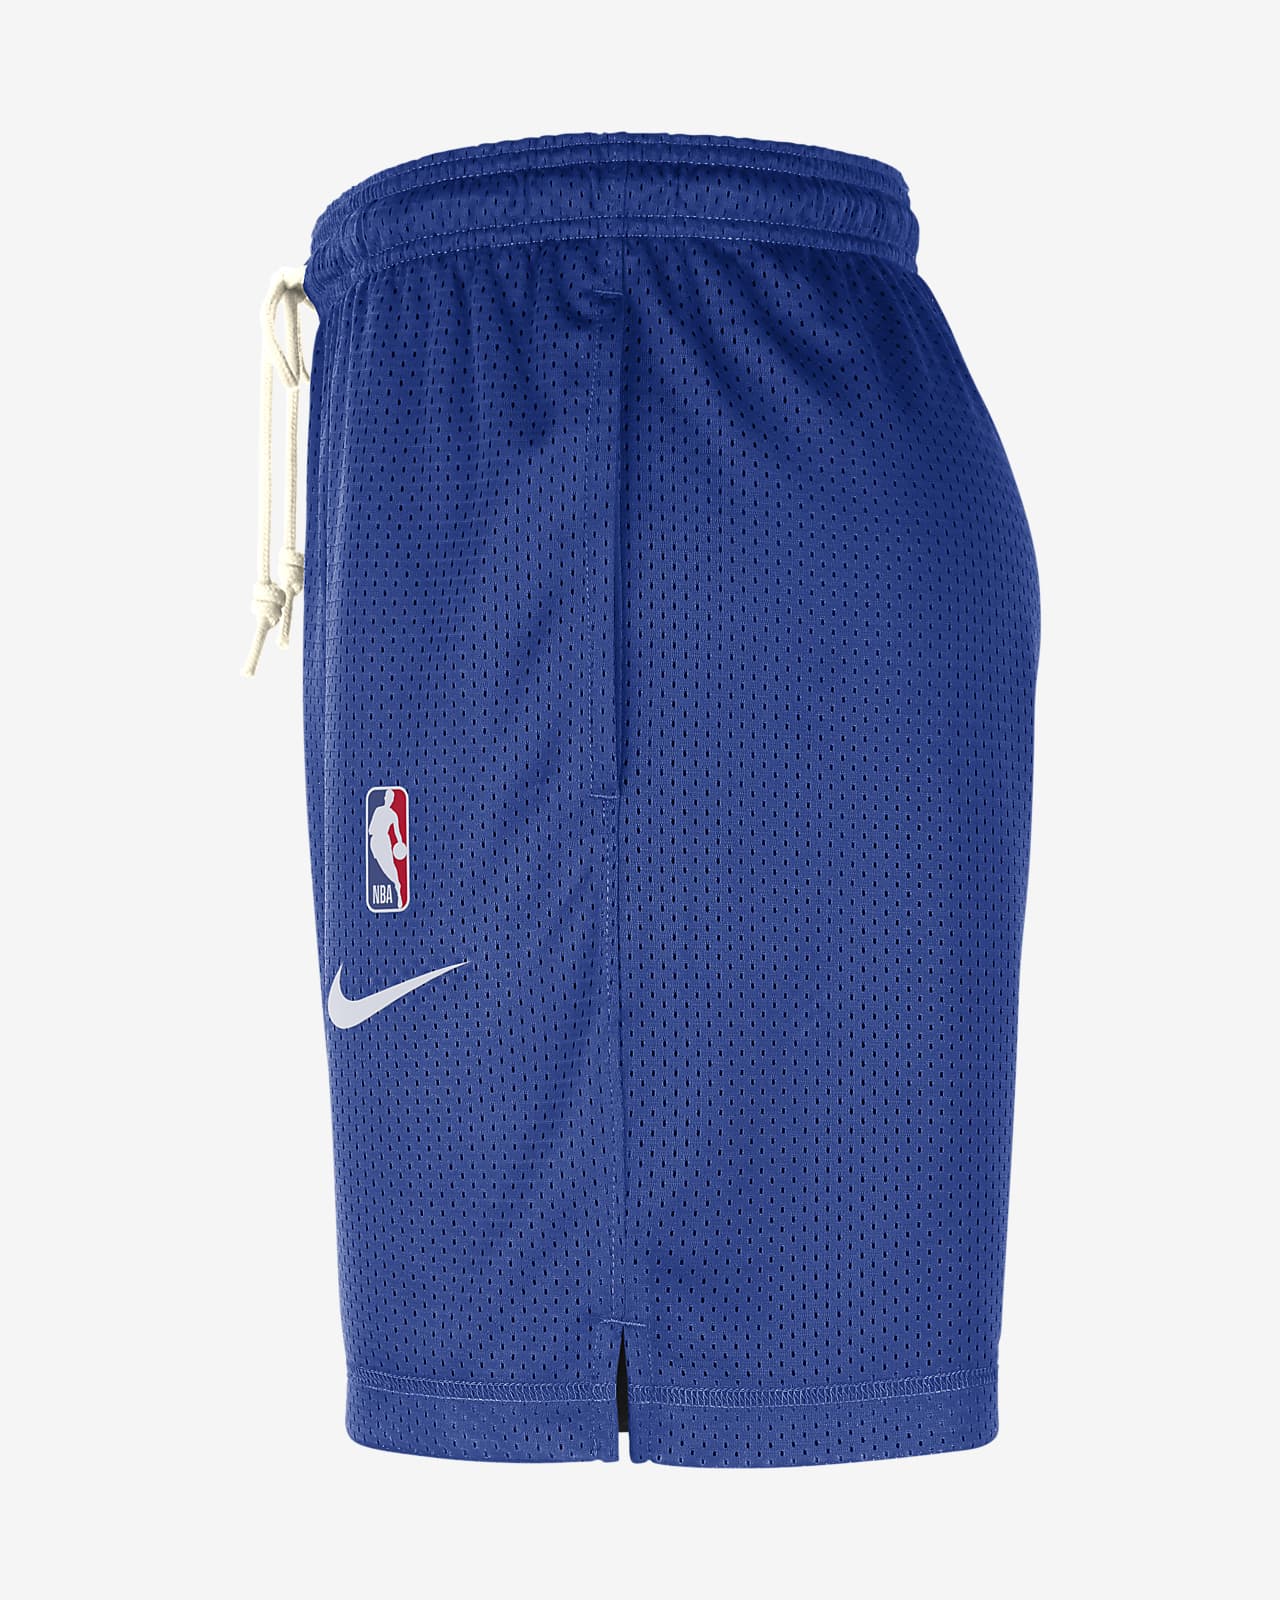 NIKE Men's NBA Issued NBA Basketball Compression Shorts 3XLT All